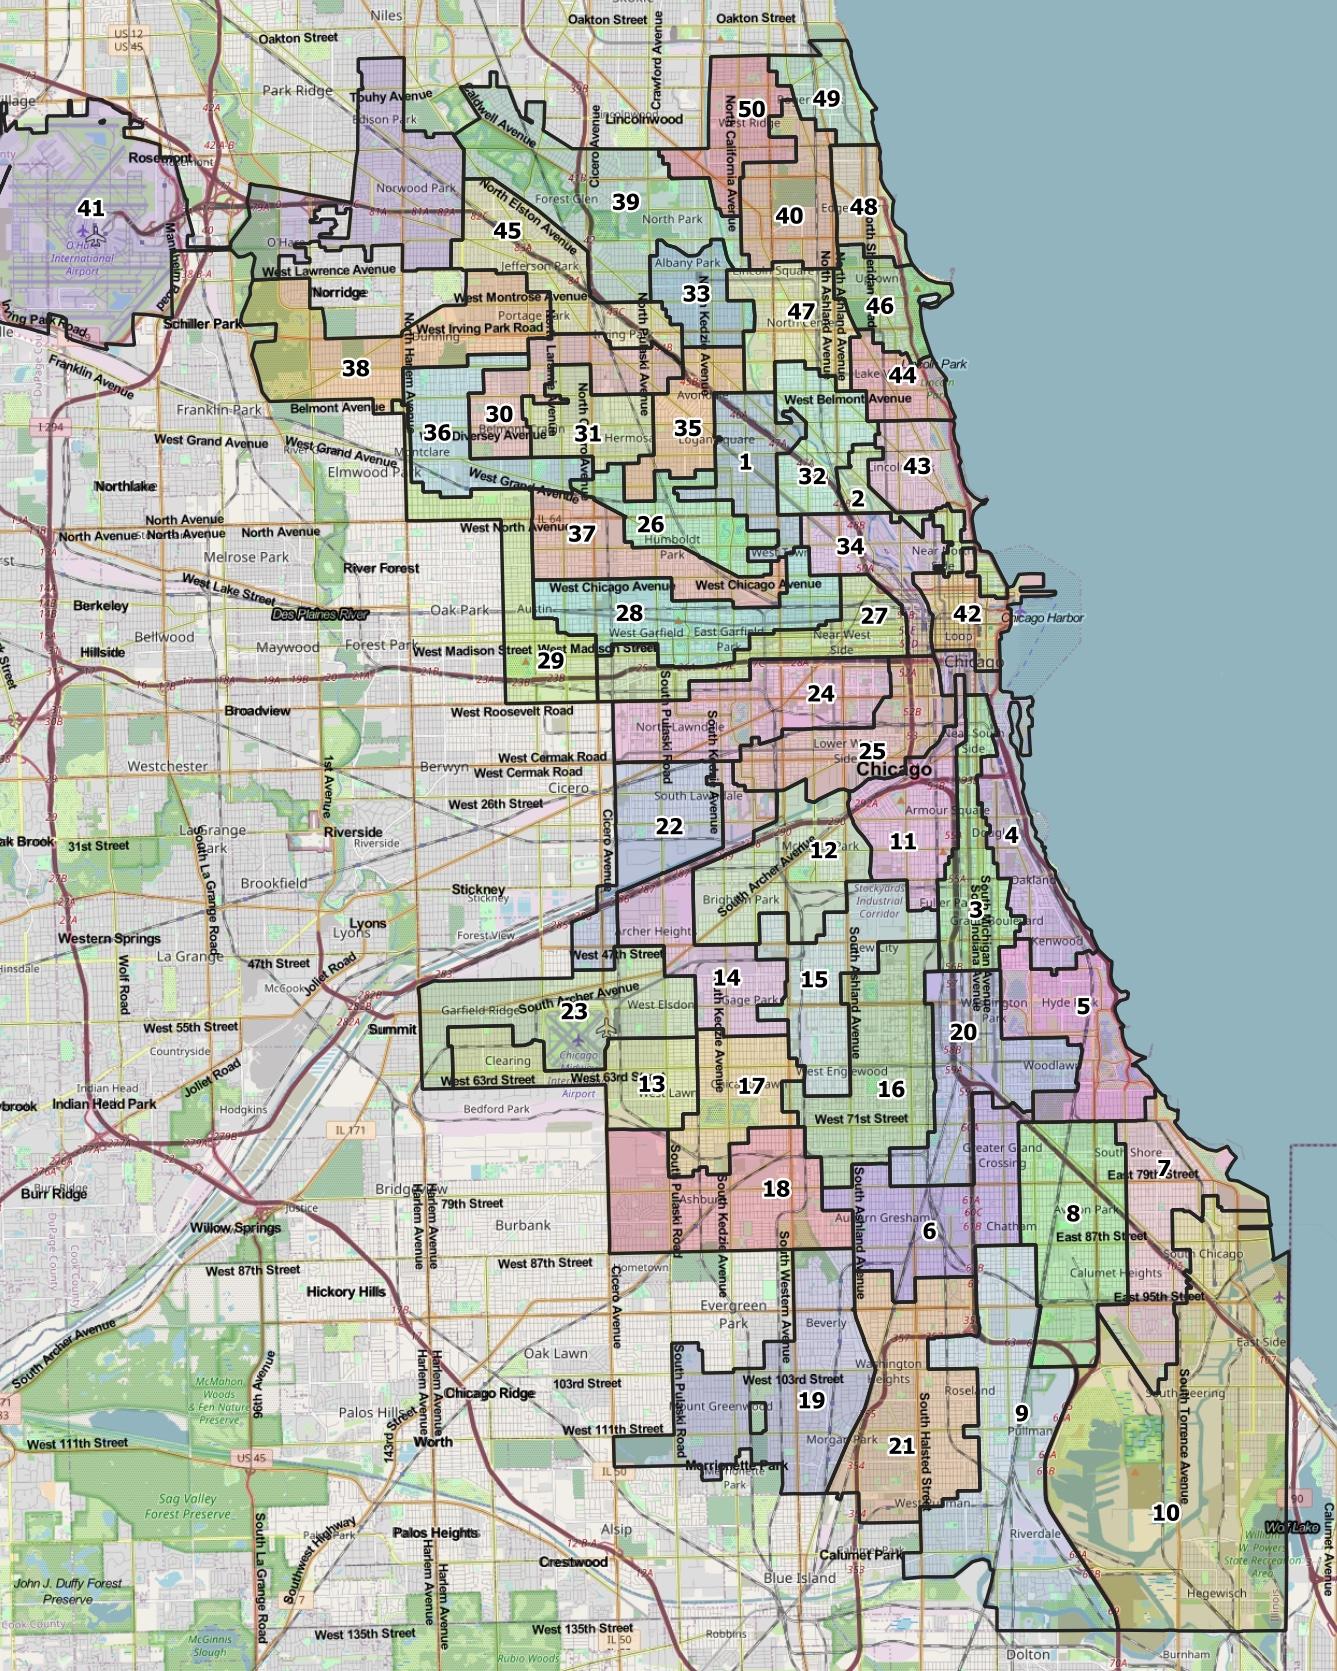 A map of Chicago neighborhoods proposed by the Chicago City Council's Latino Caucus. [Provided]